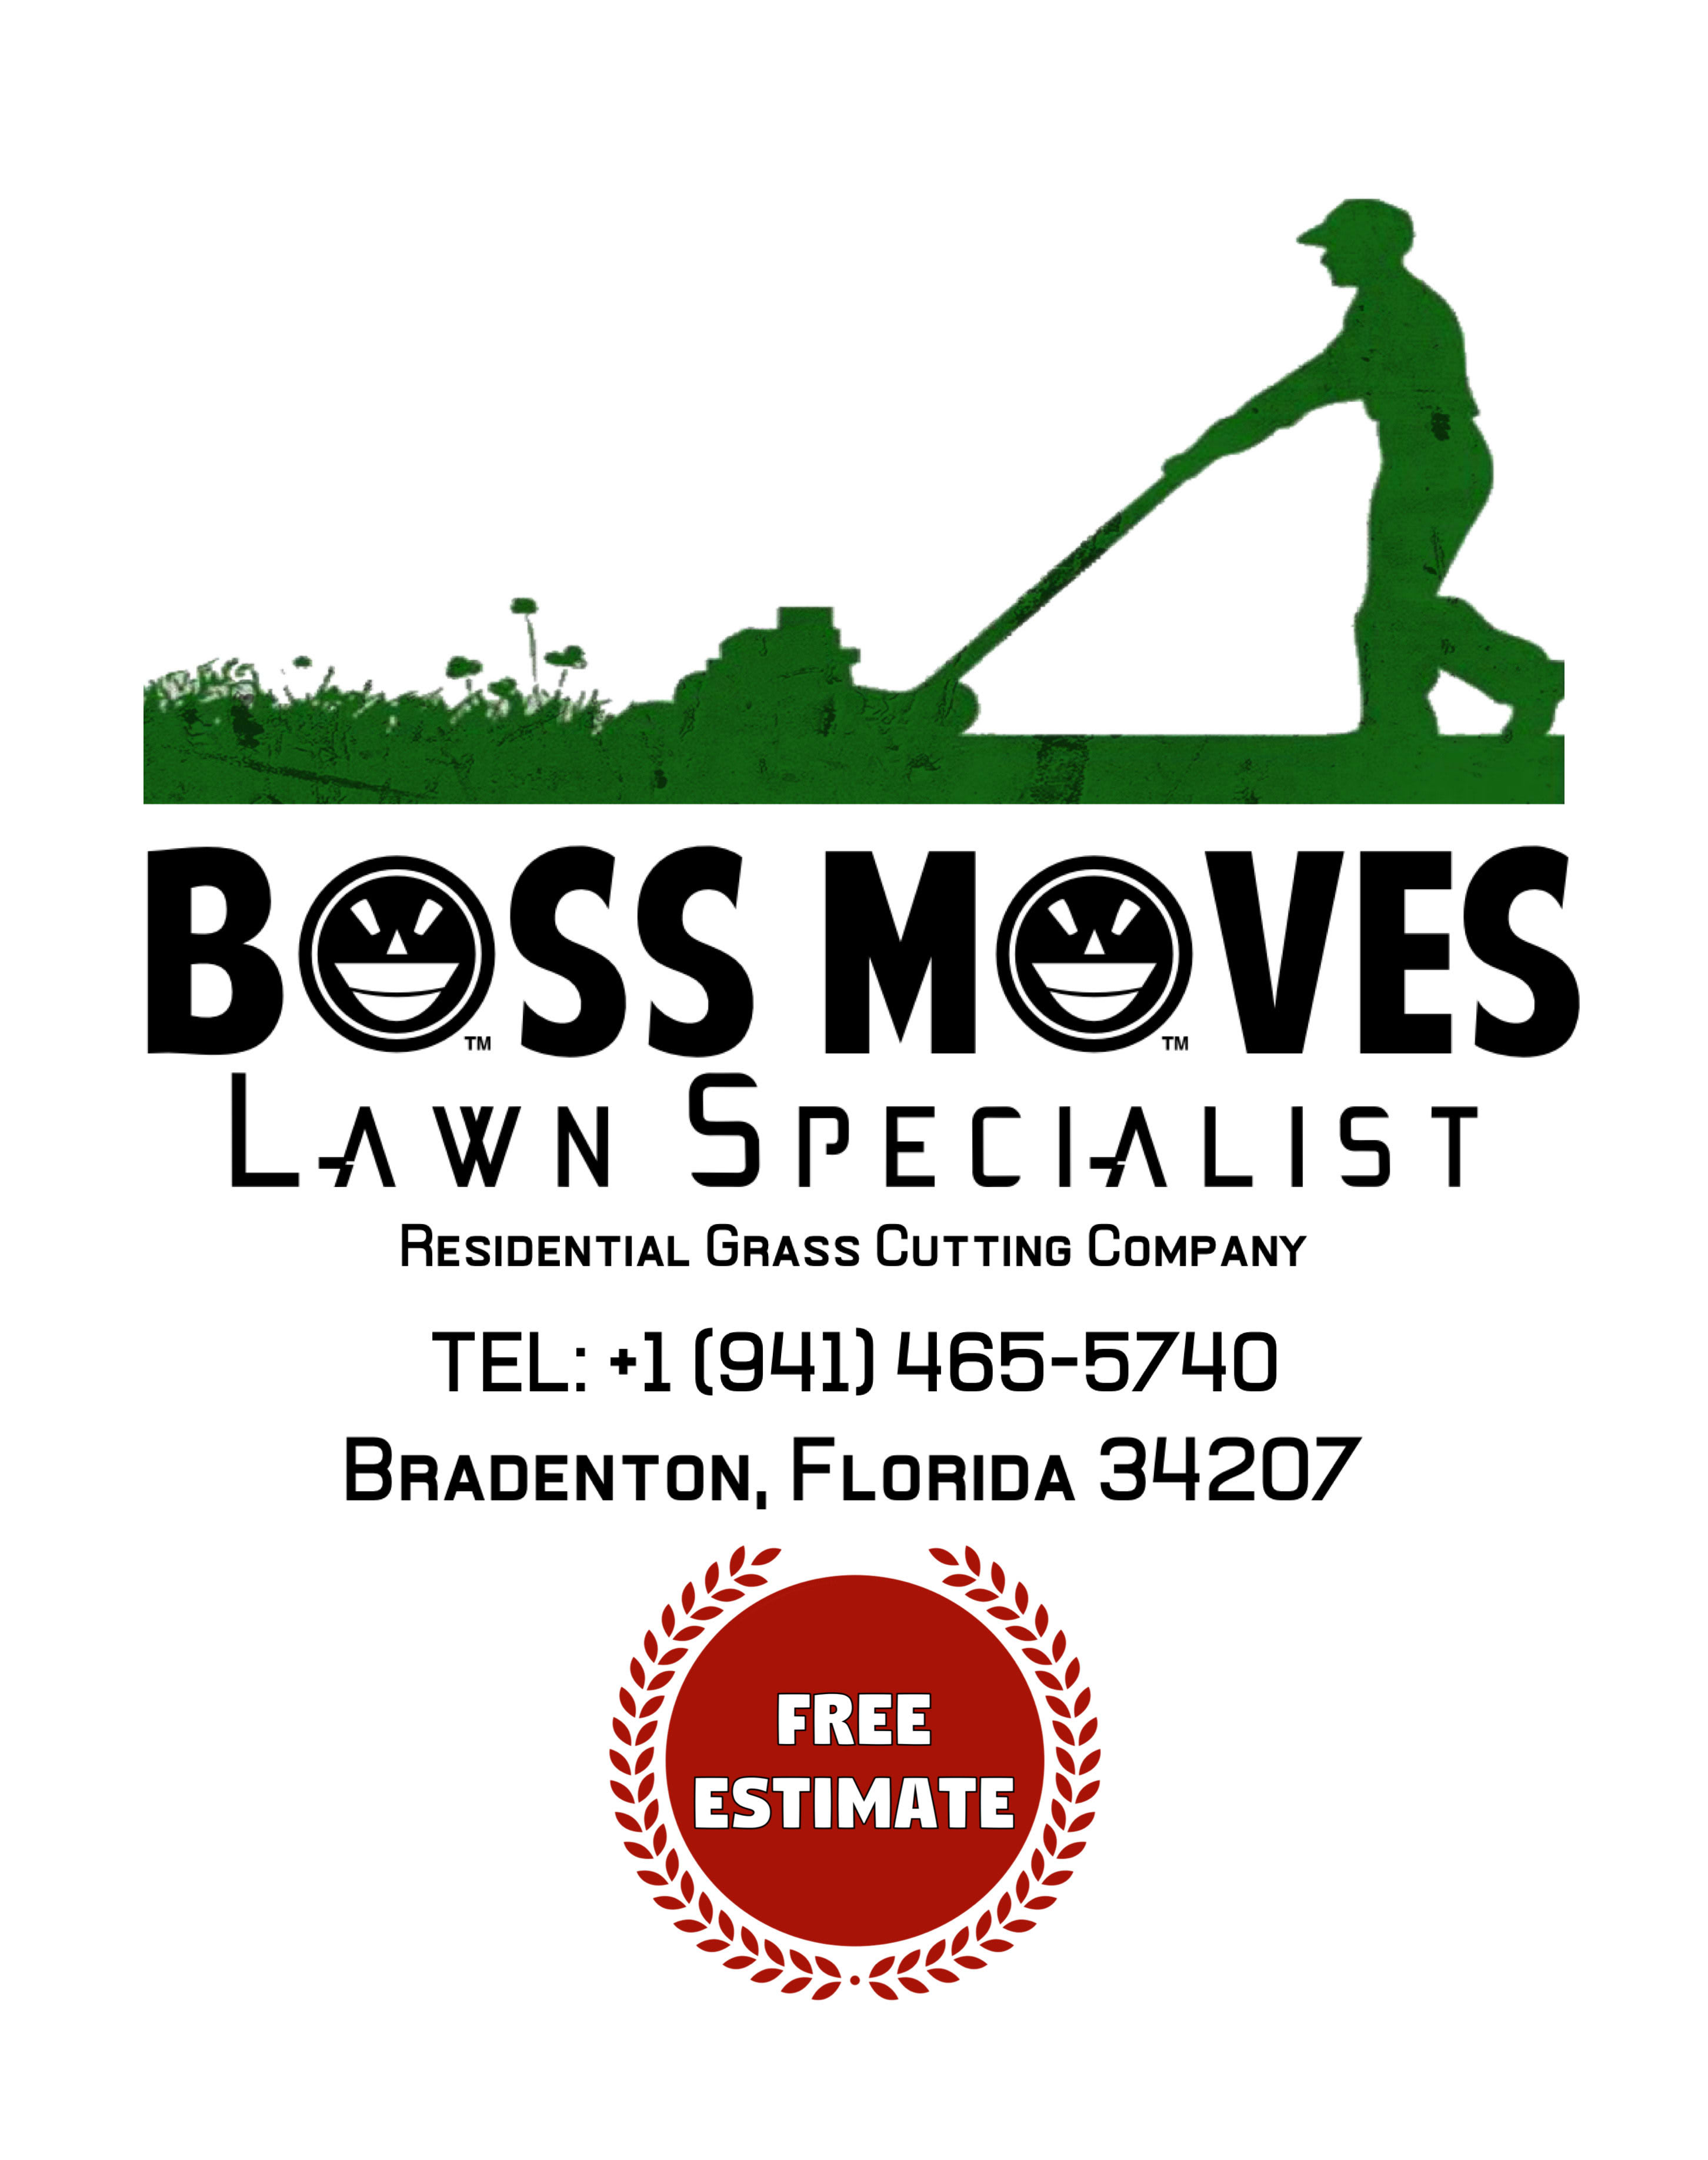 Boss Moves Lawn Specialist